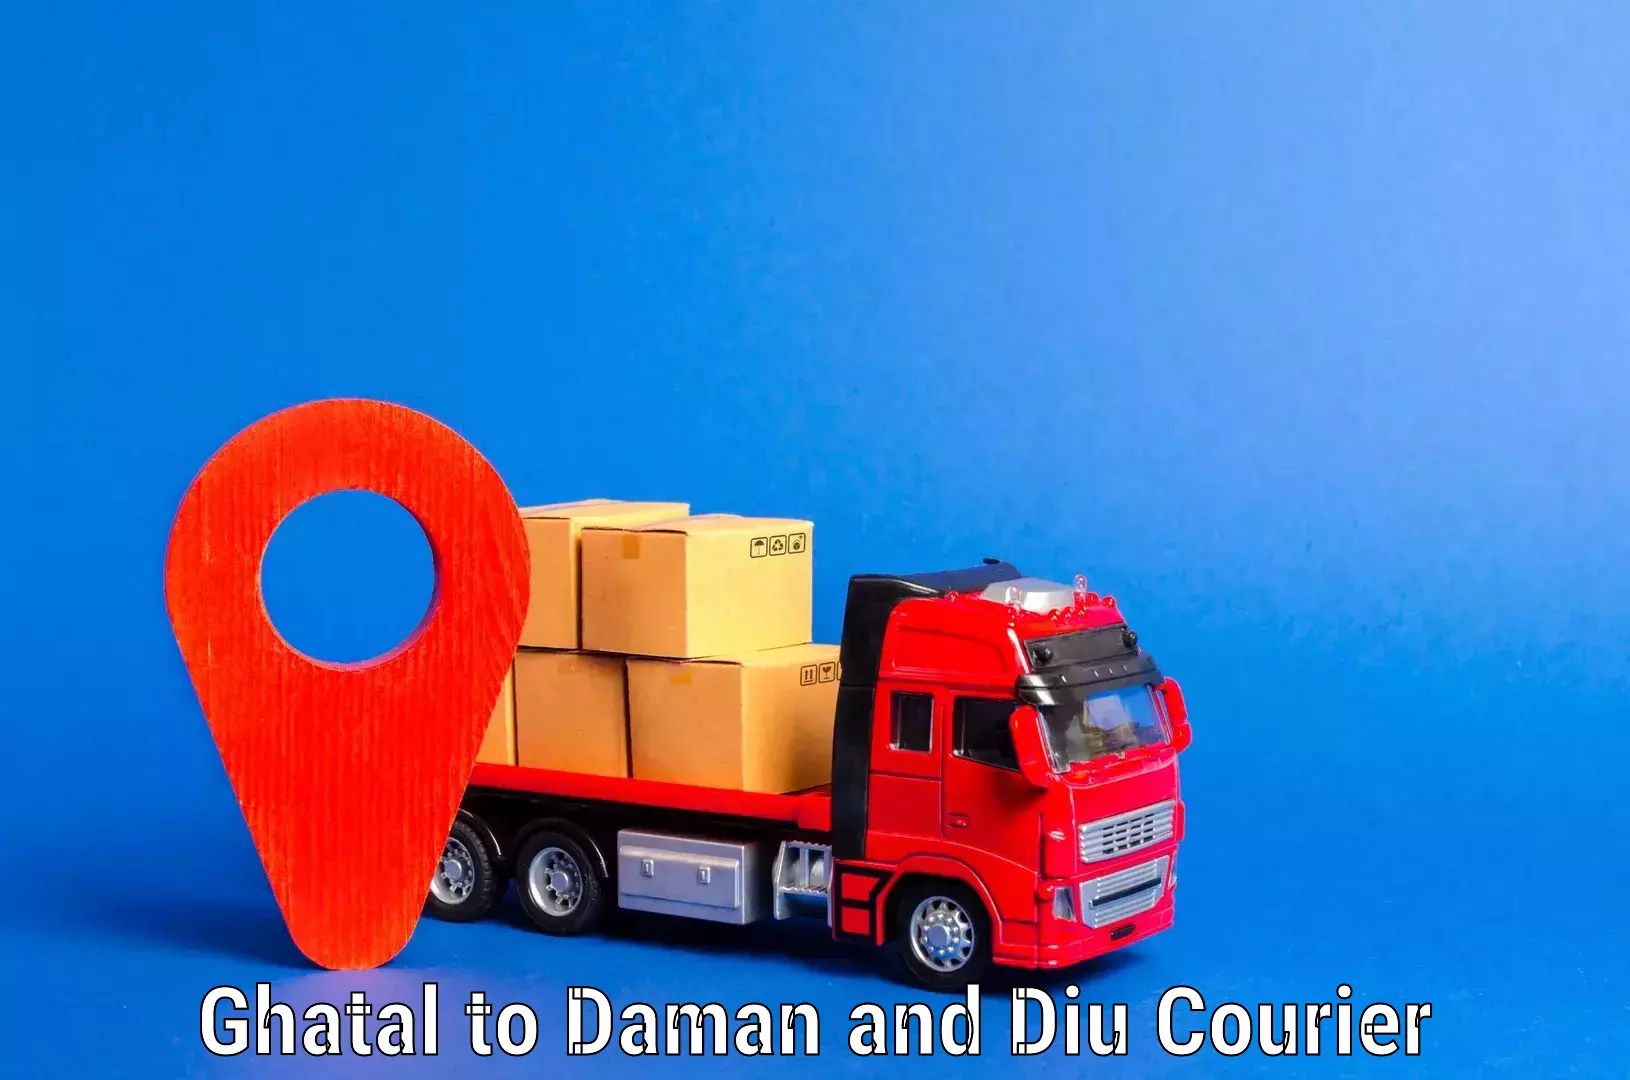 Furniture moving specialists Ghatal to Daman and Diu